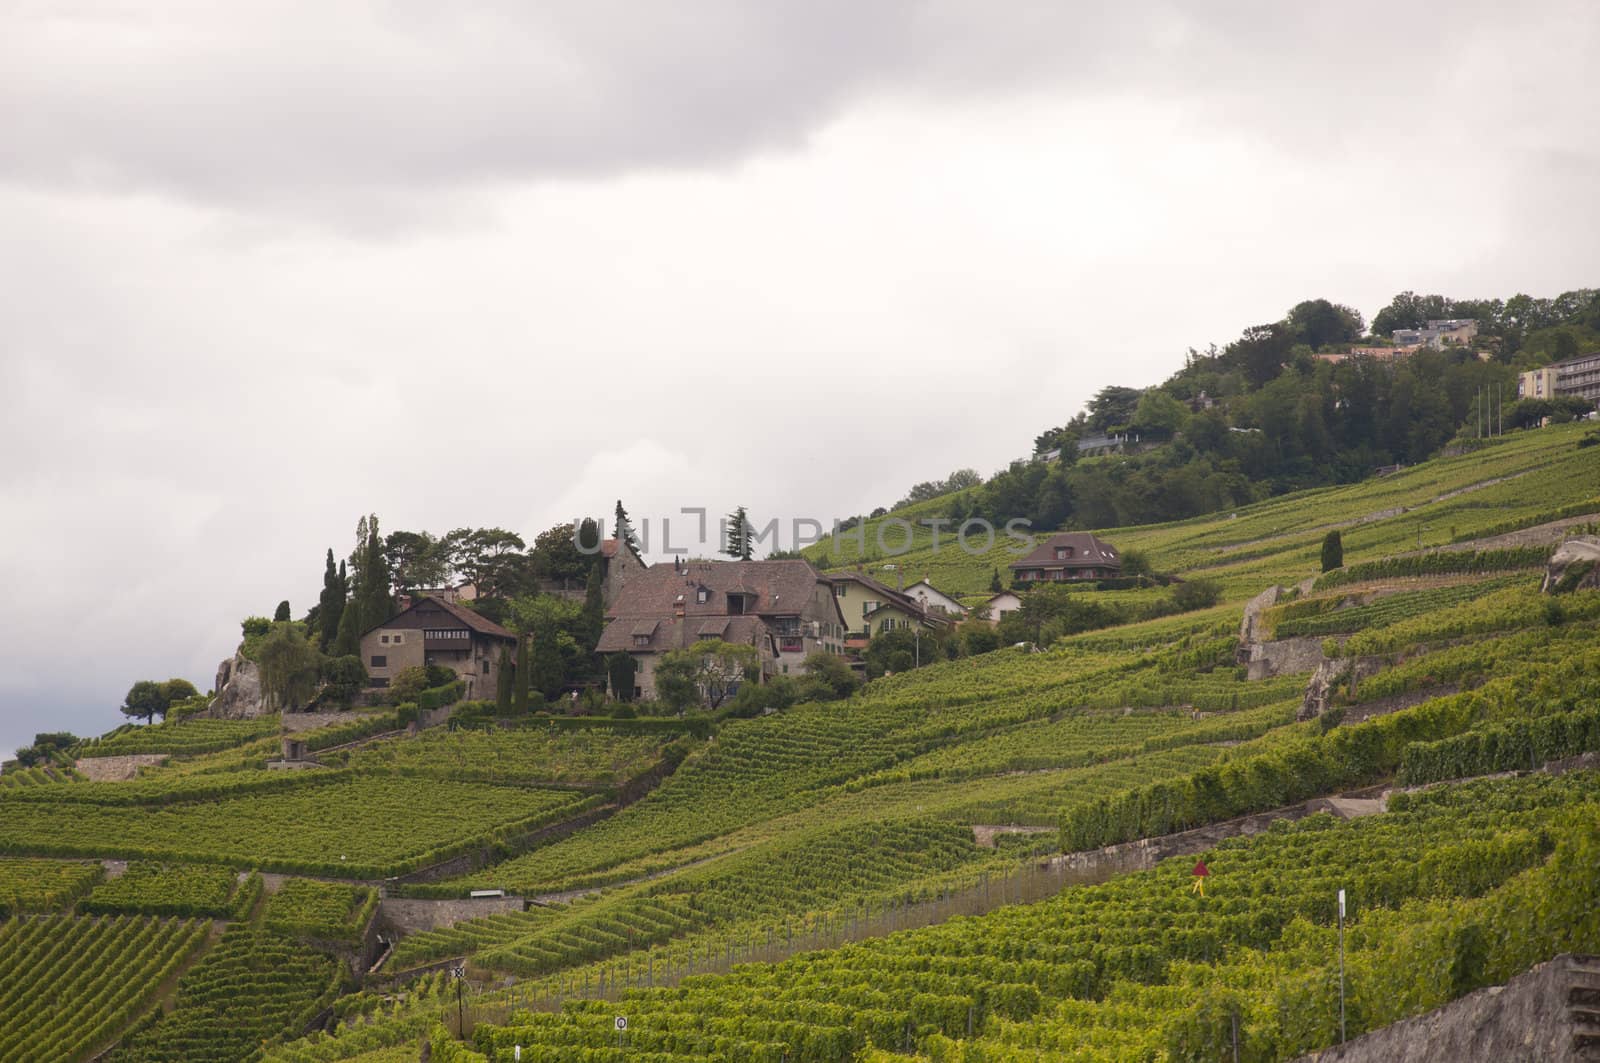 Houses amidst vineyards on a cloudy day by kdreams02